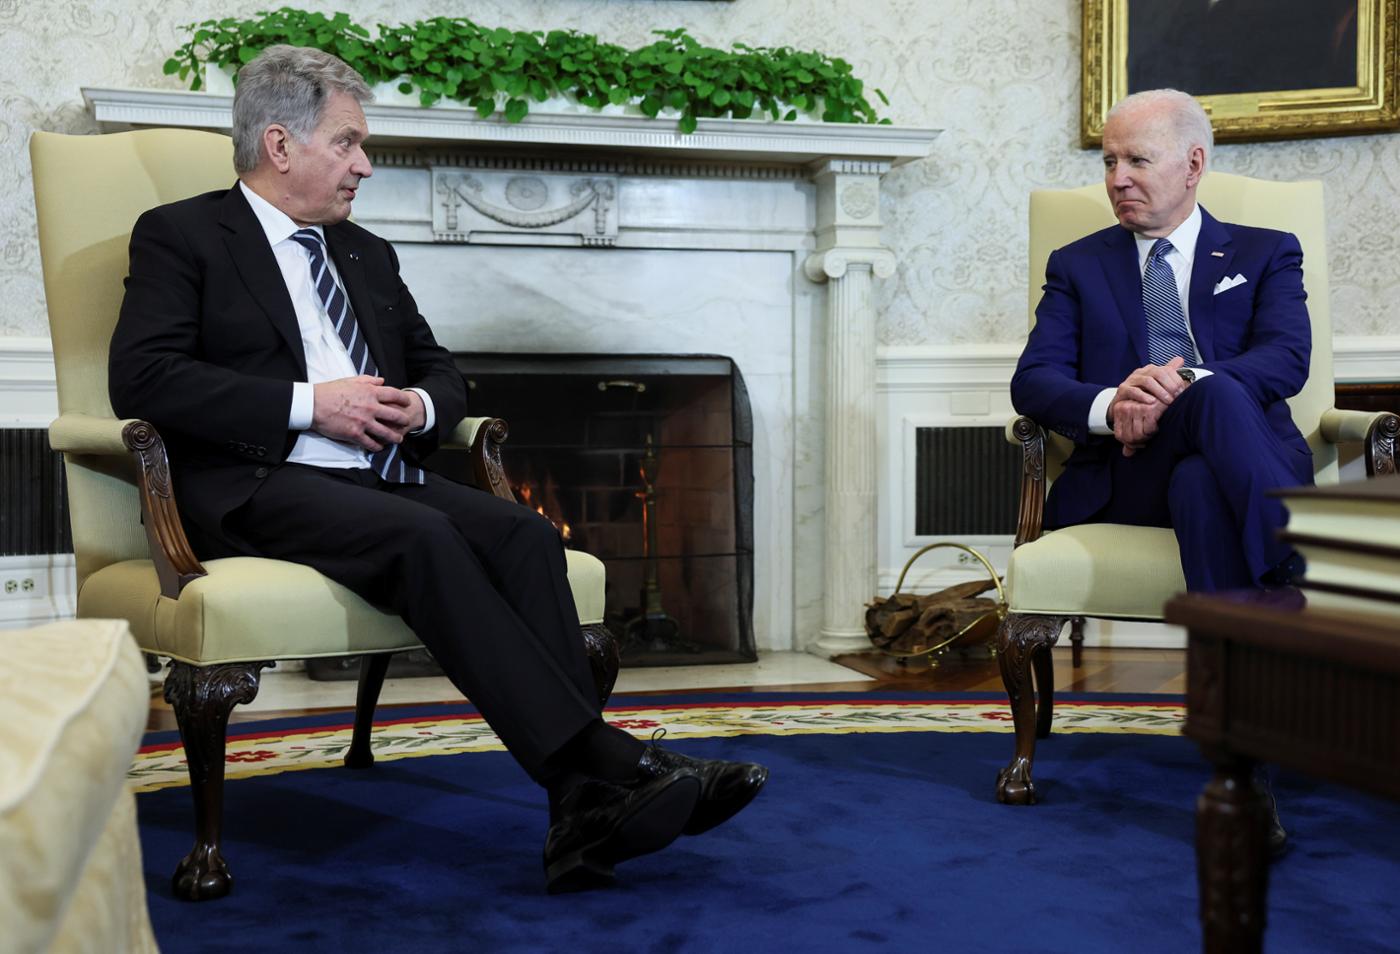 President of the United States Joe Biden, and President of Finland Sauli Niinisto meet in the Oval Office at the White House in Washington, US, 4 March 2022. © Reuters
)